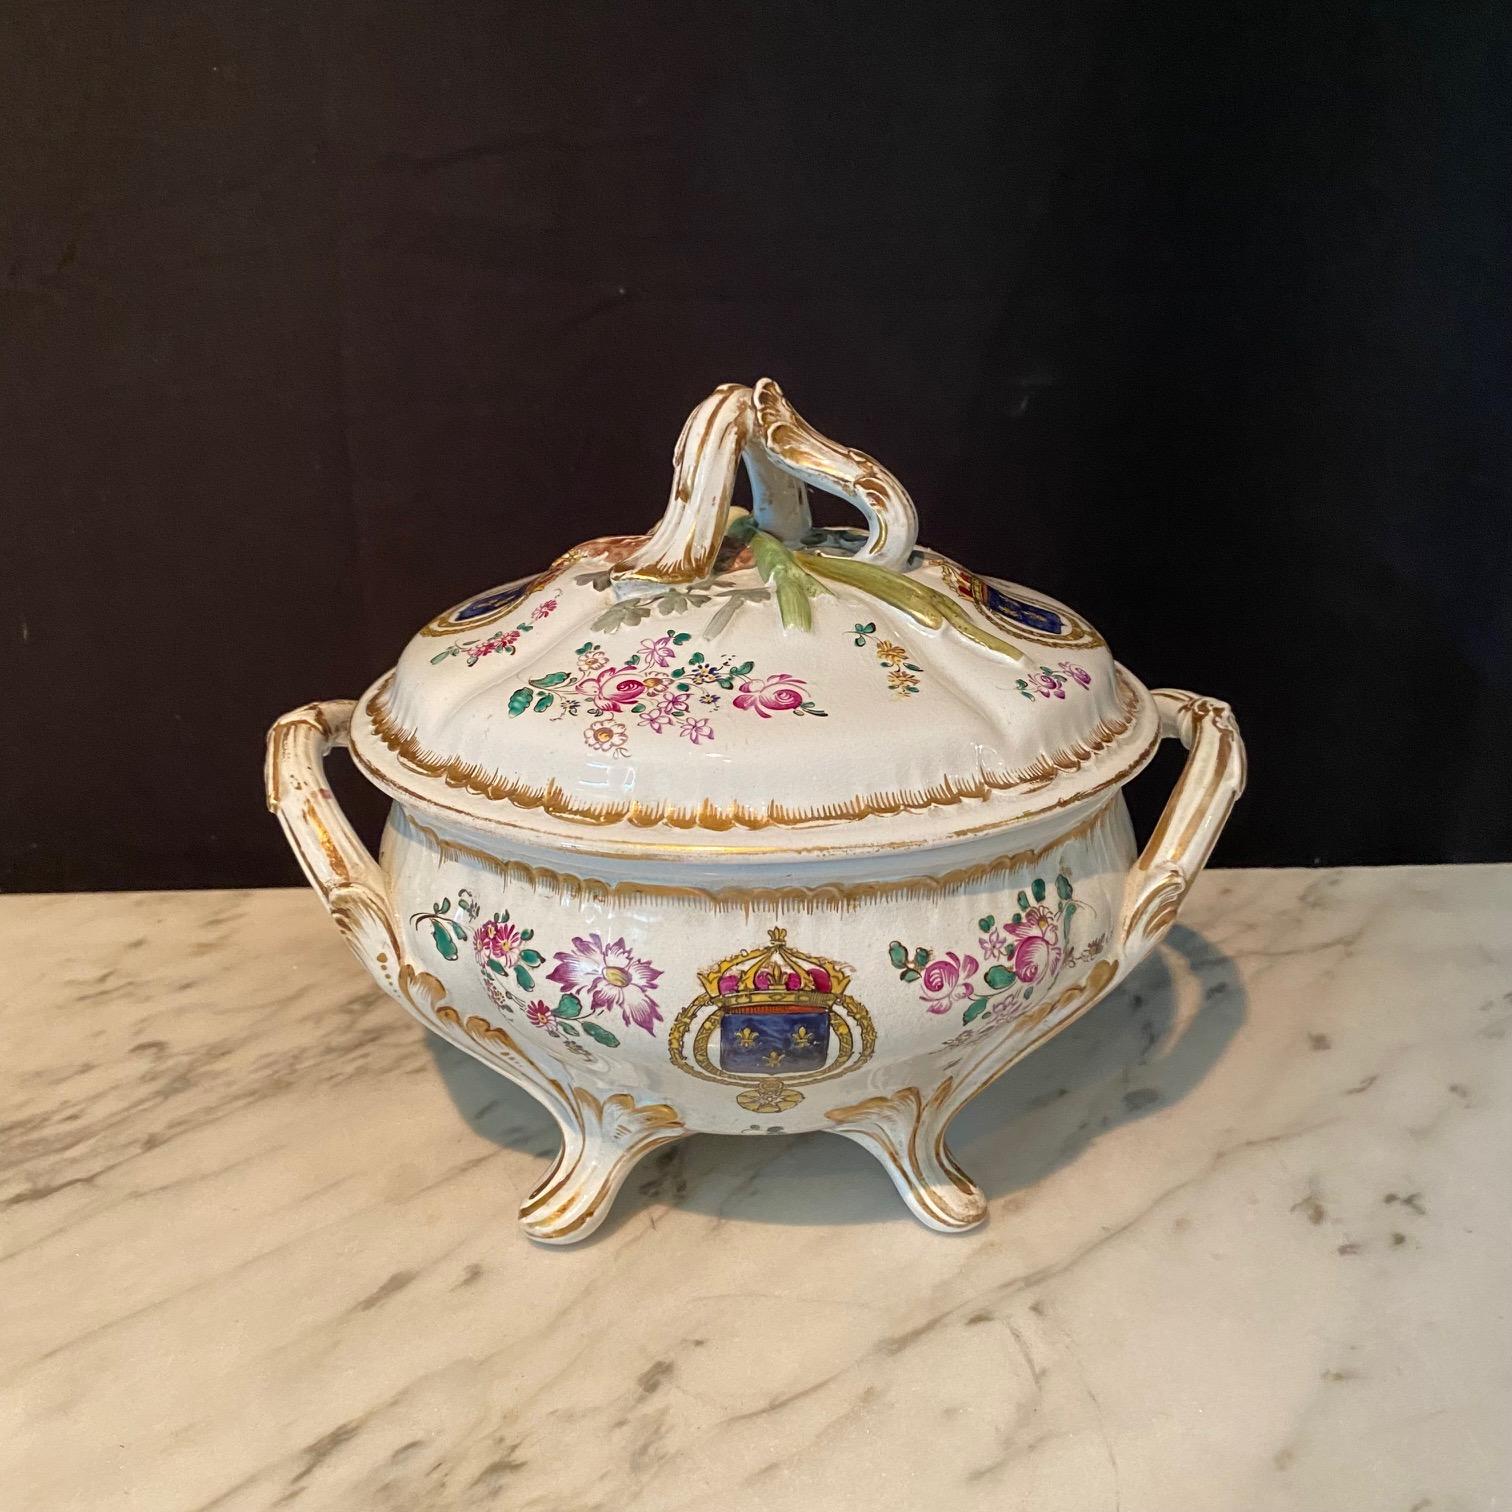 Pair French Hand Painted Faience Porcelain Soup Tureens with Coats of Arms For Sale 6